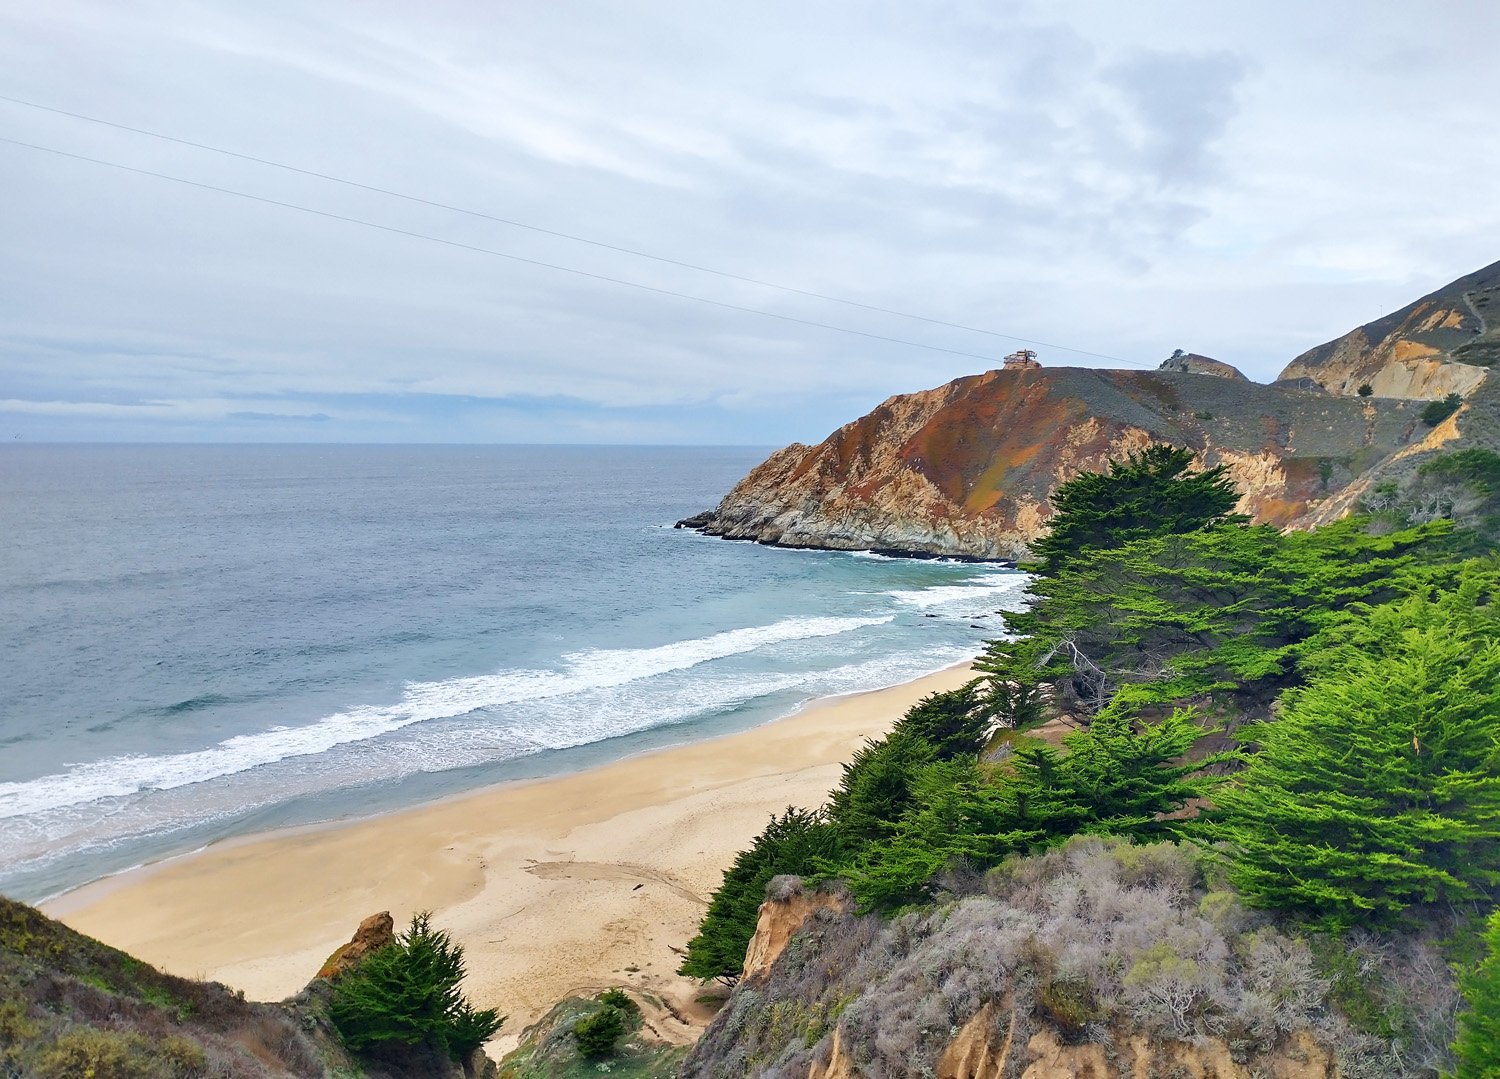 Amazing views of the beach following highway 1.